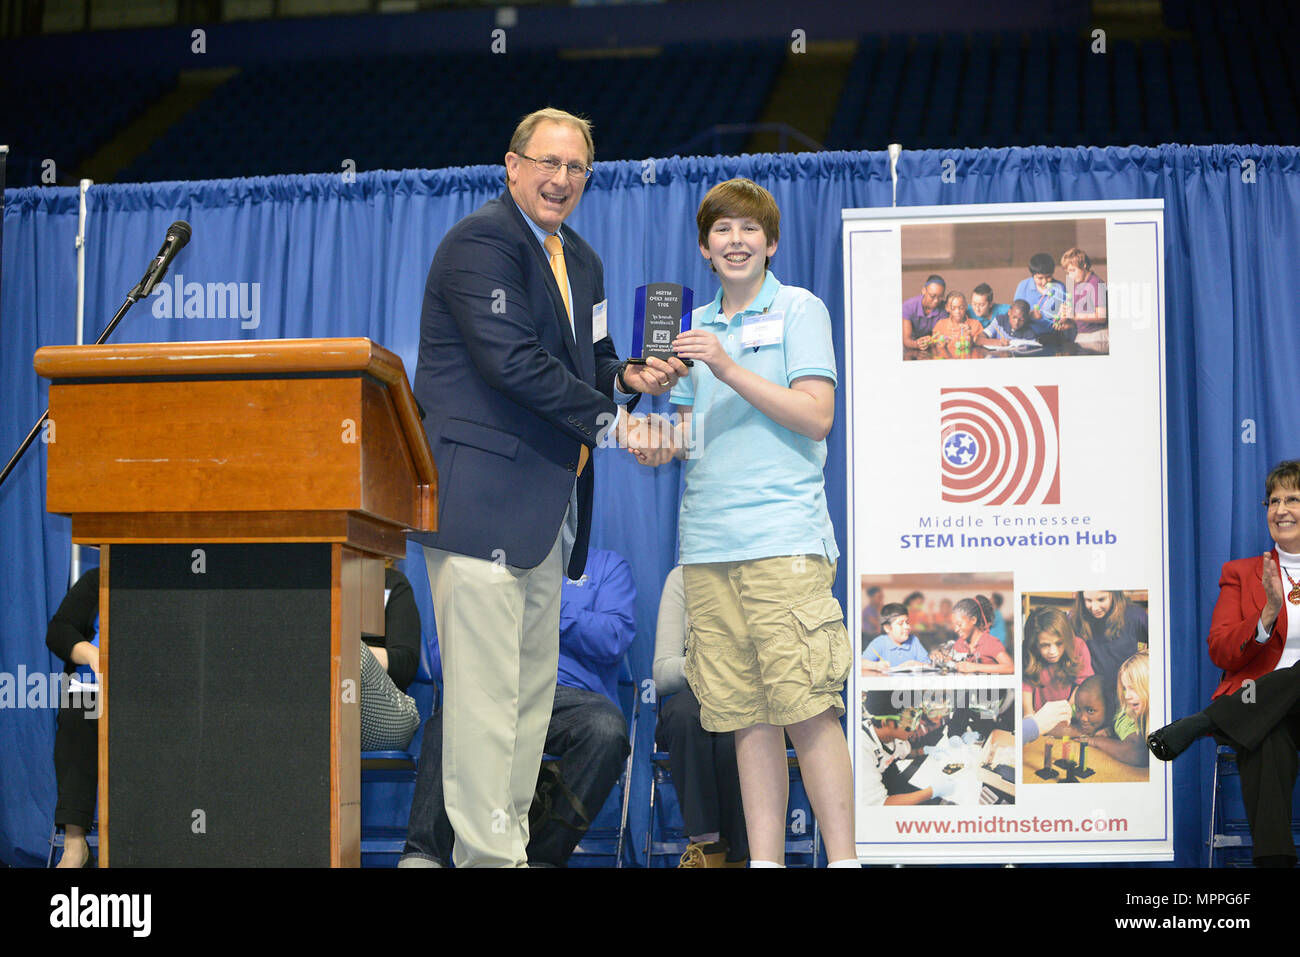 Jimmy Waddle, U.S. Army Corps of Engineers Nashville District Engineering and Construction Division chief, presents an award to Carson Fisher, 7th grade student from Robert E. Ellis Middle School in Hendersonville, Tenn., during the Science, Technology, Engineering and Mathematics Expo at Tennessee State University Gentry Center April 6, 2017. He was presented with a glass trophy and certificate for his project, a self-rising levee system. Stock Photo